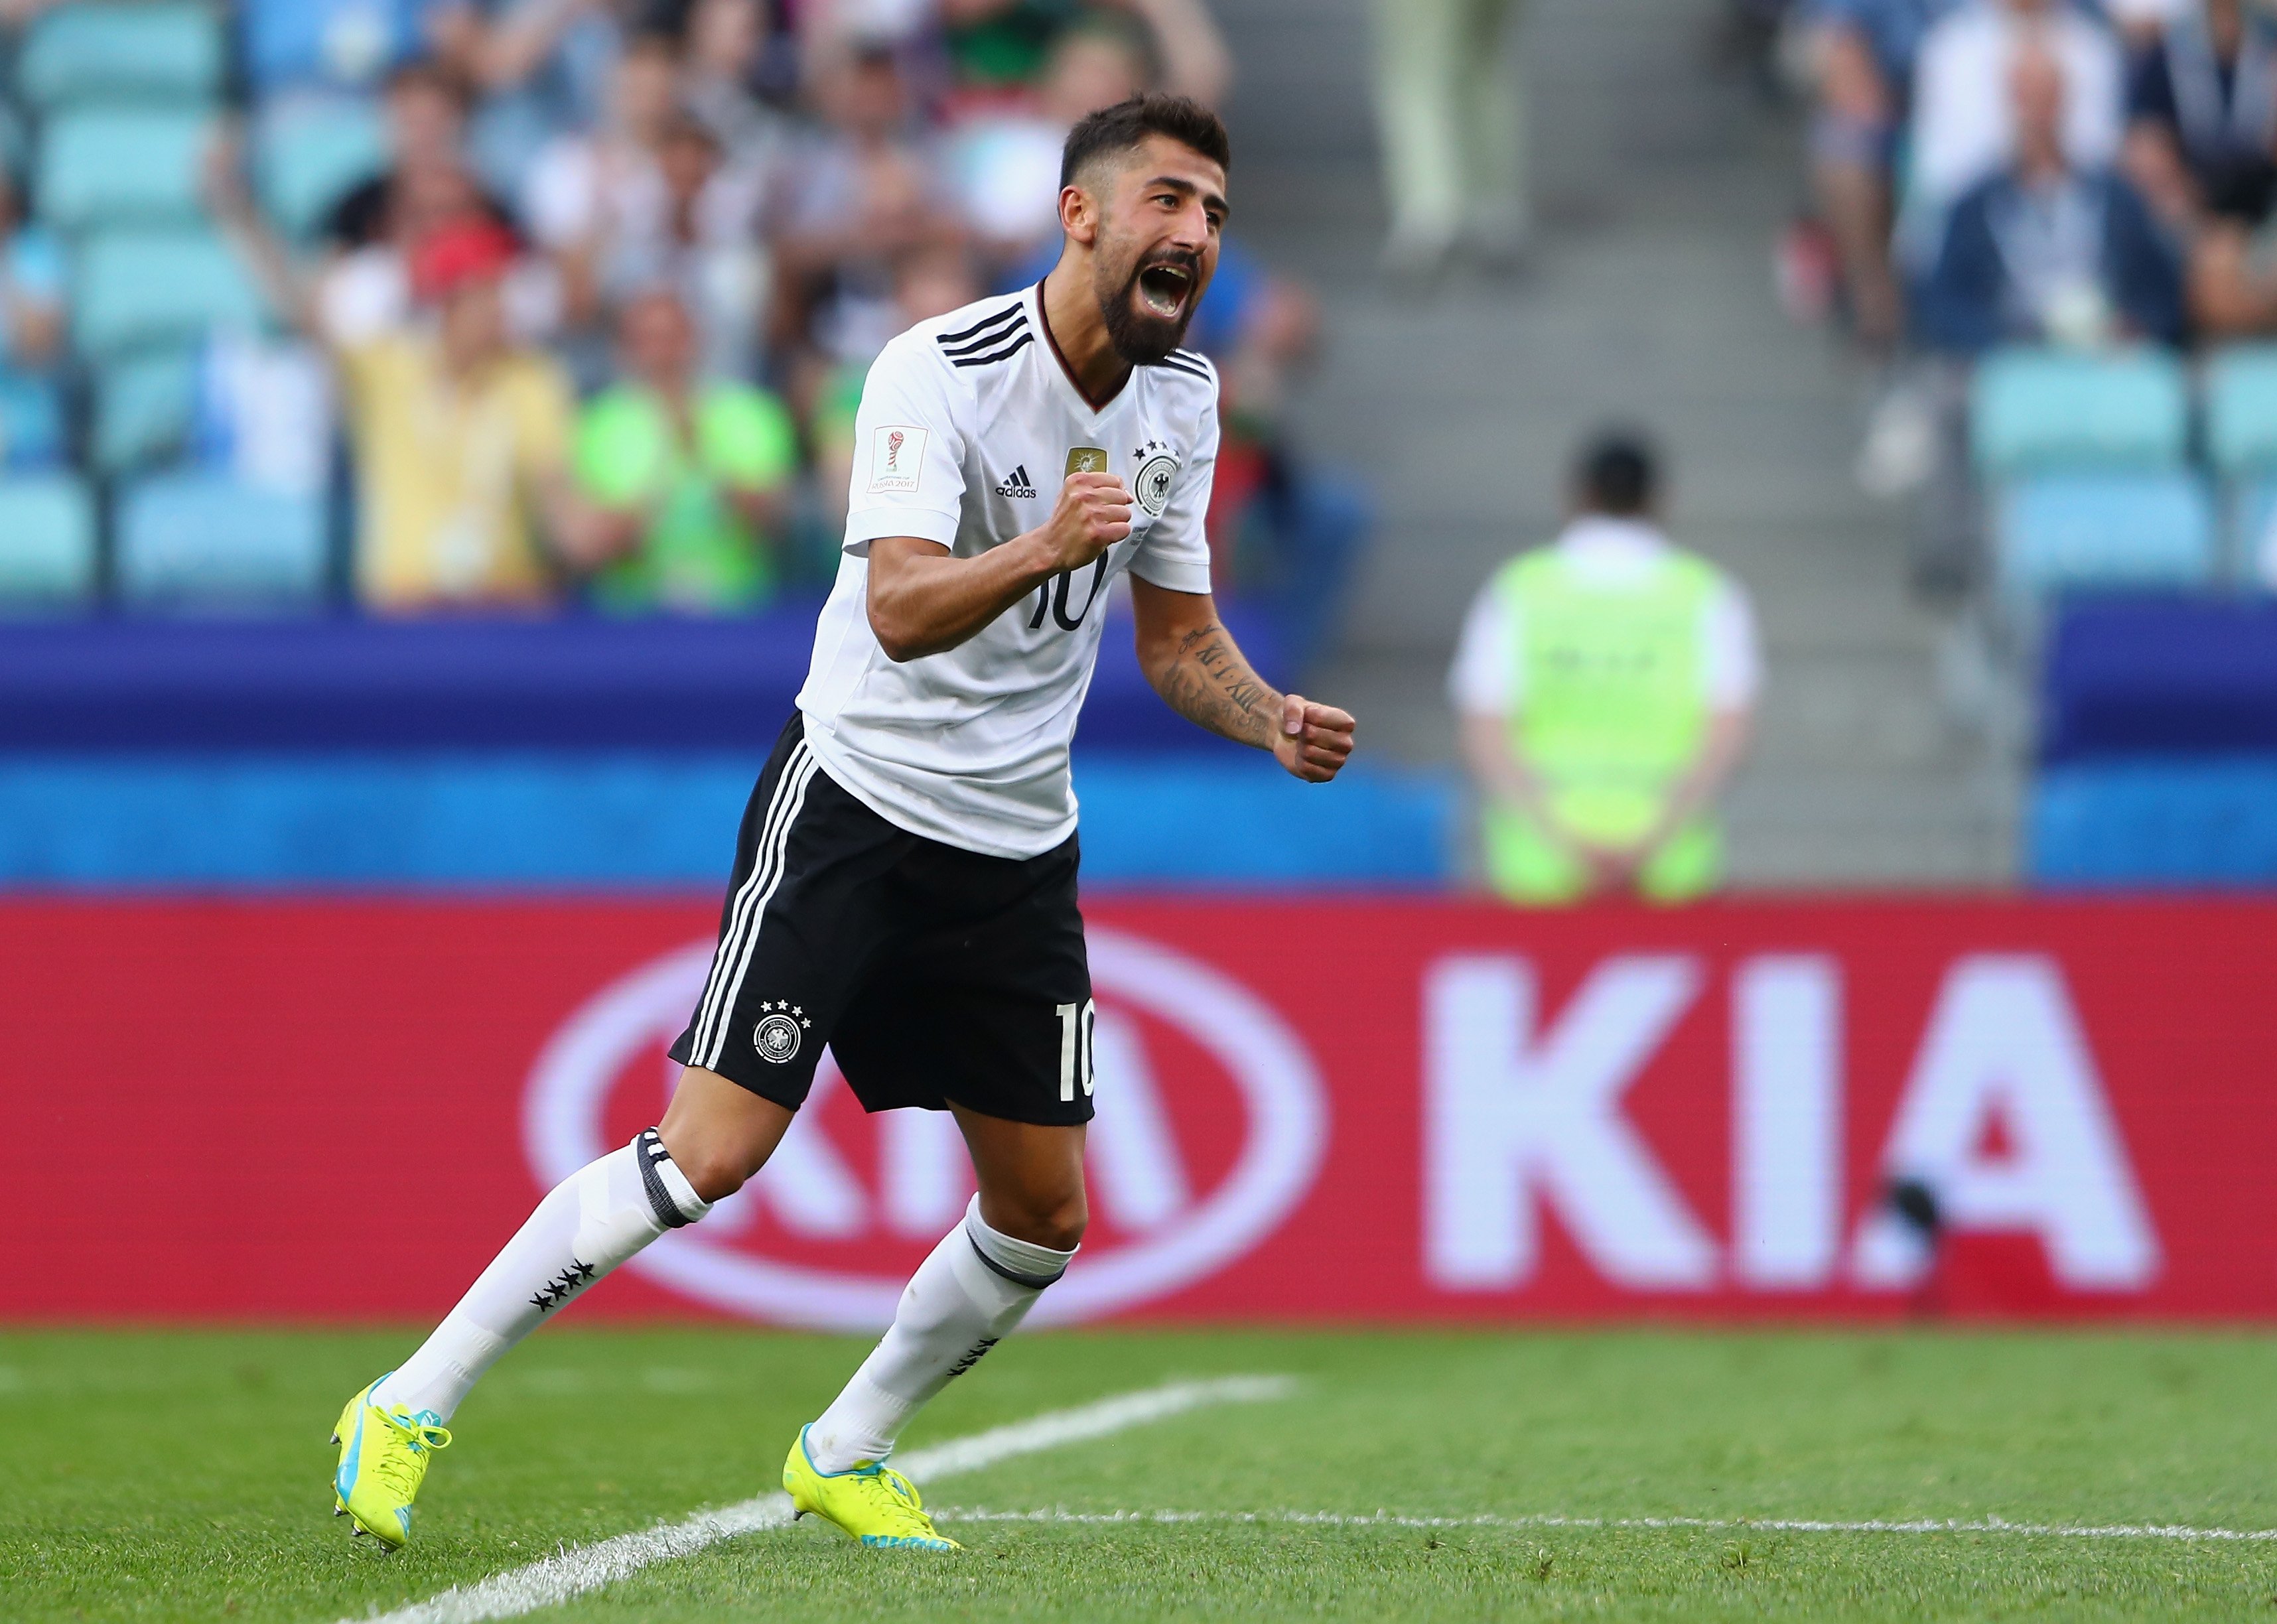 FIFA on Twitter: "????PHOTO Kerem Demirbay celebrates after opening the scoring for ????????Germany #ConfedCup #GERCMR https://t.co/VBLxkNx8Un" / Twitter